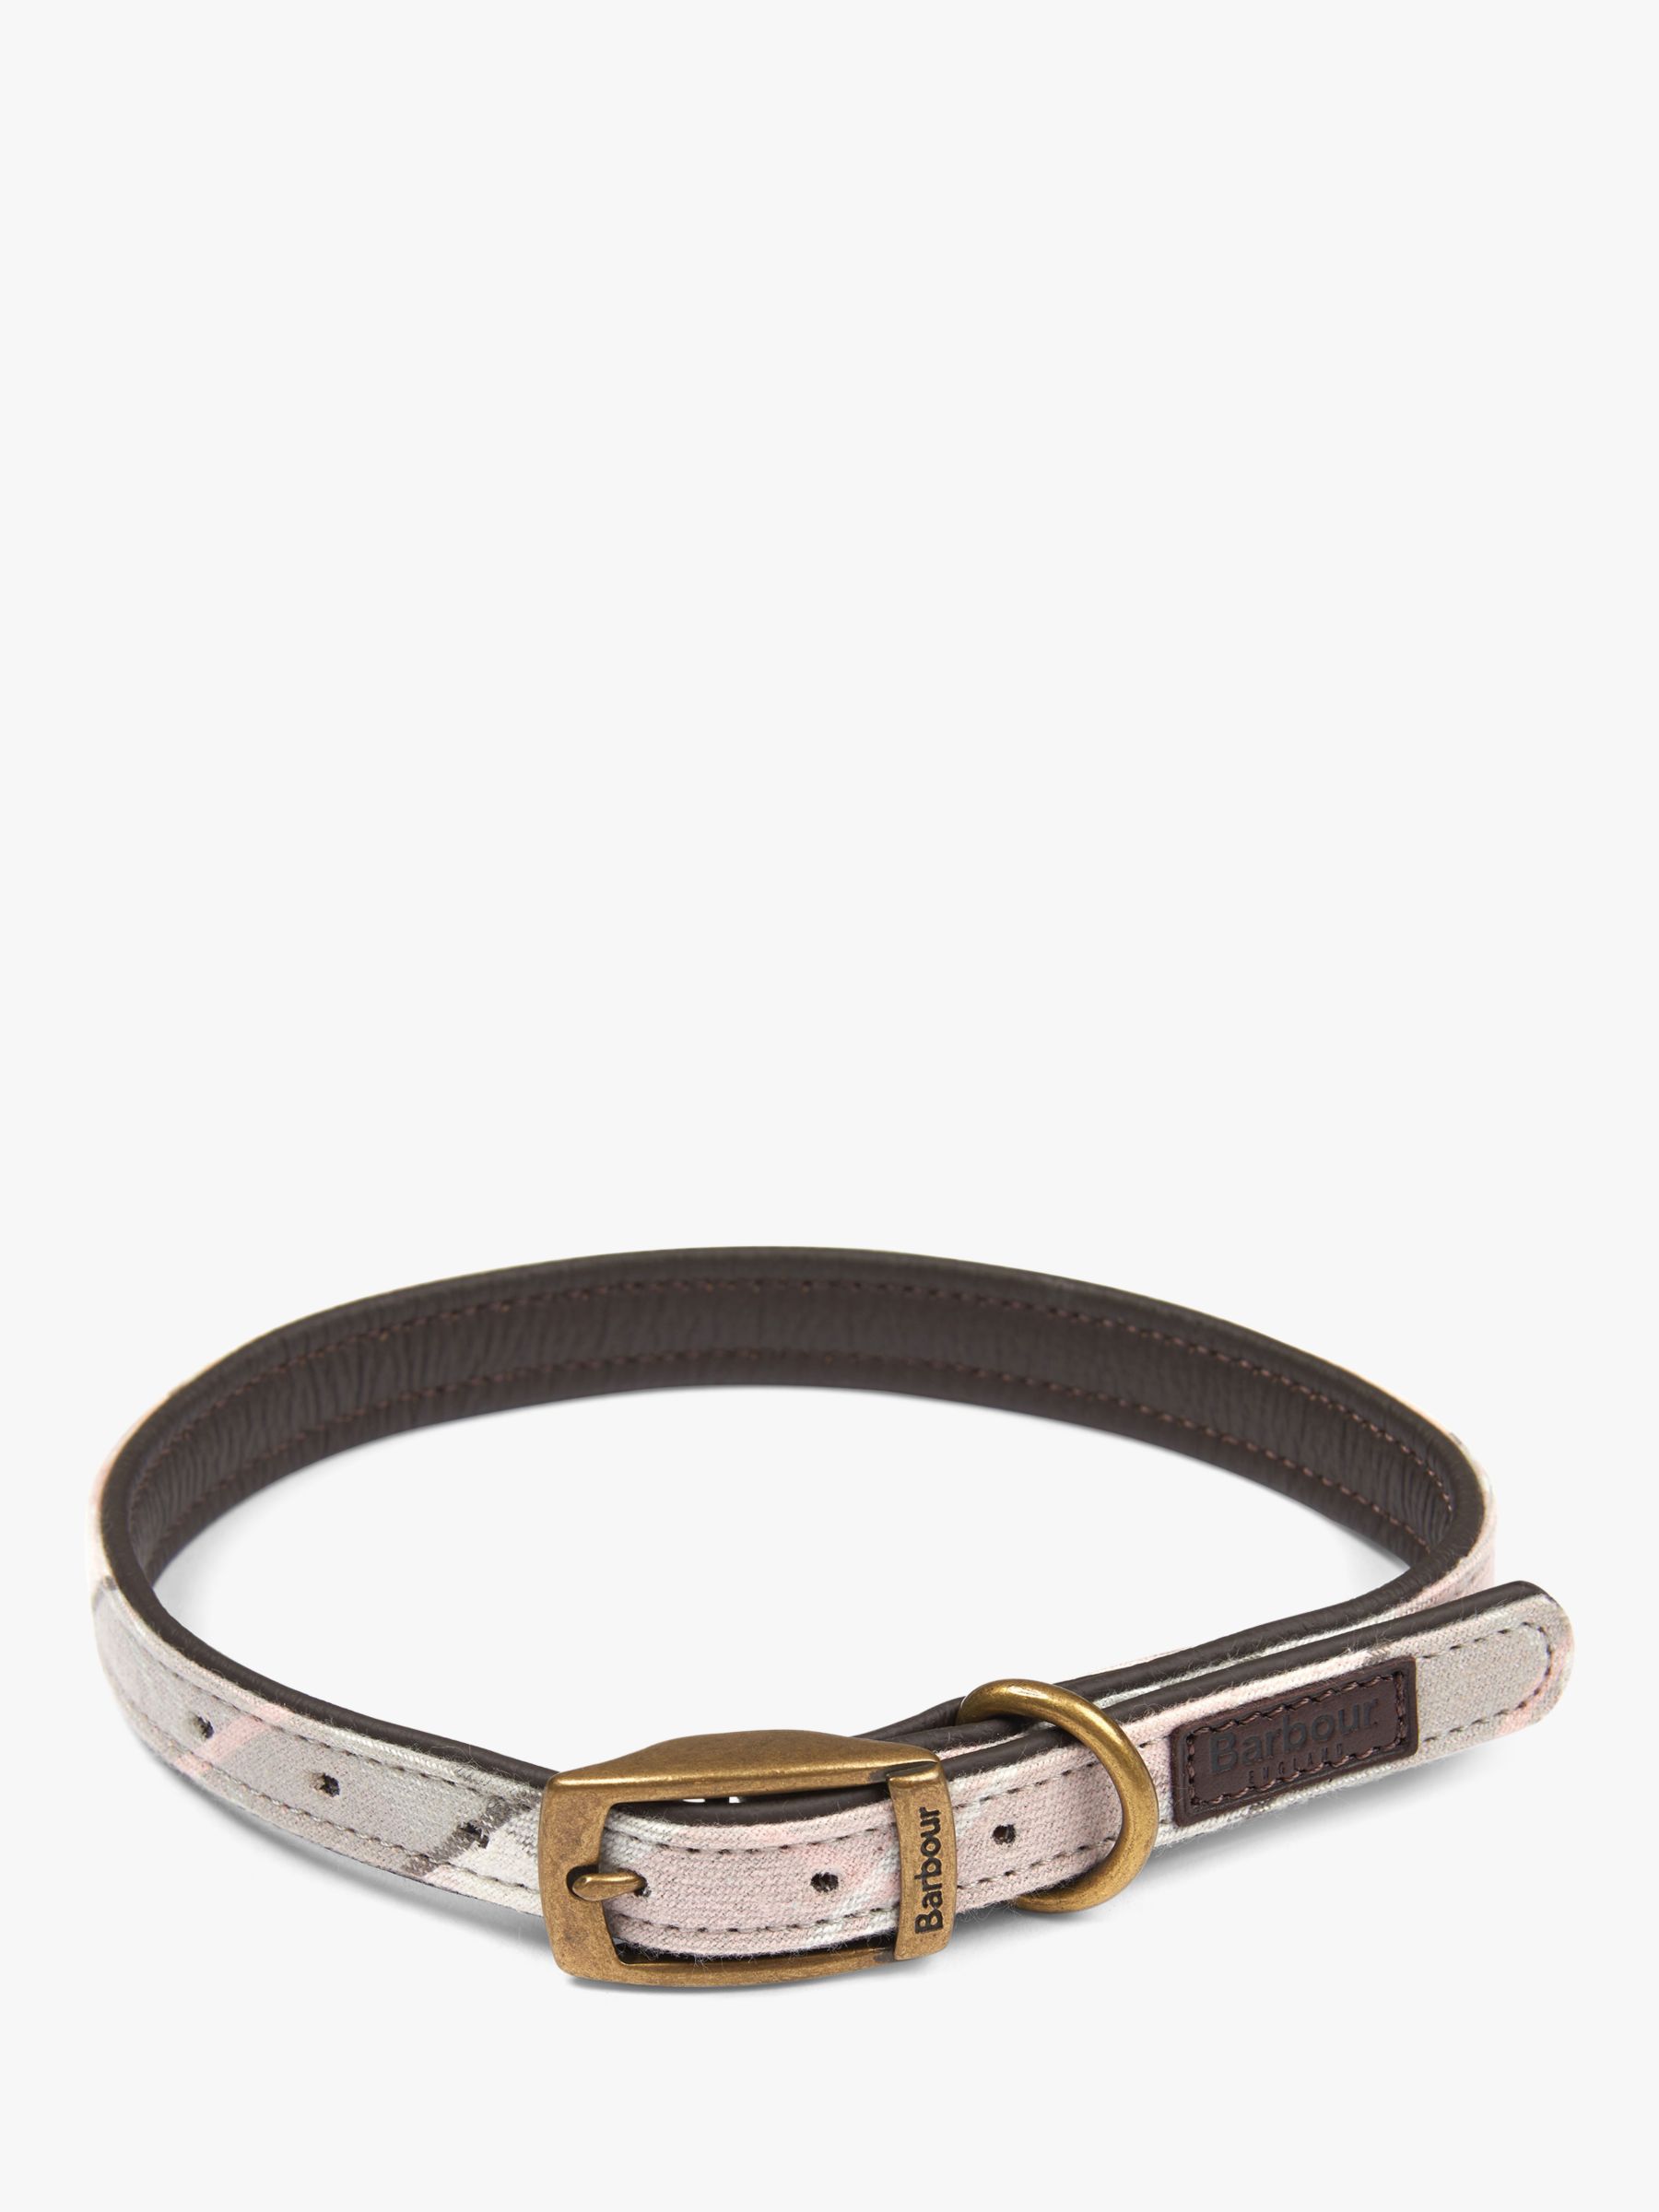 barbour dog lead pink